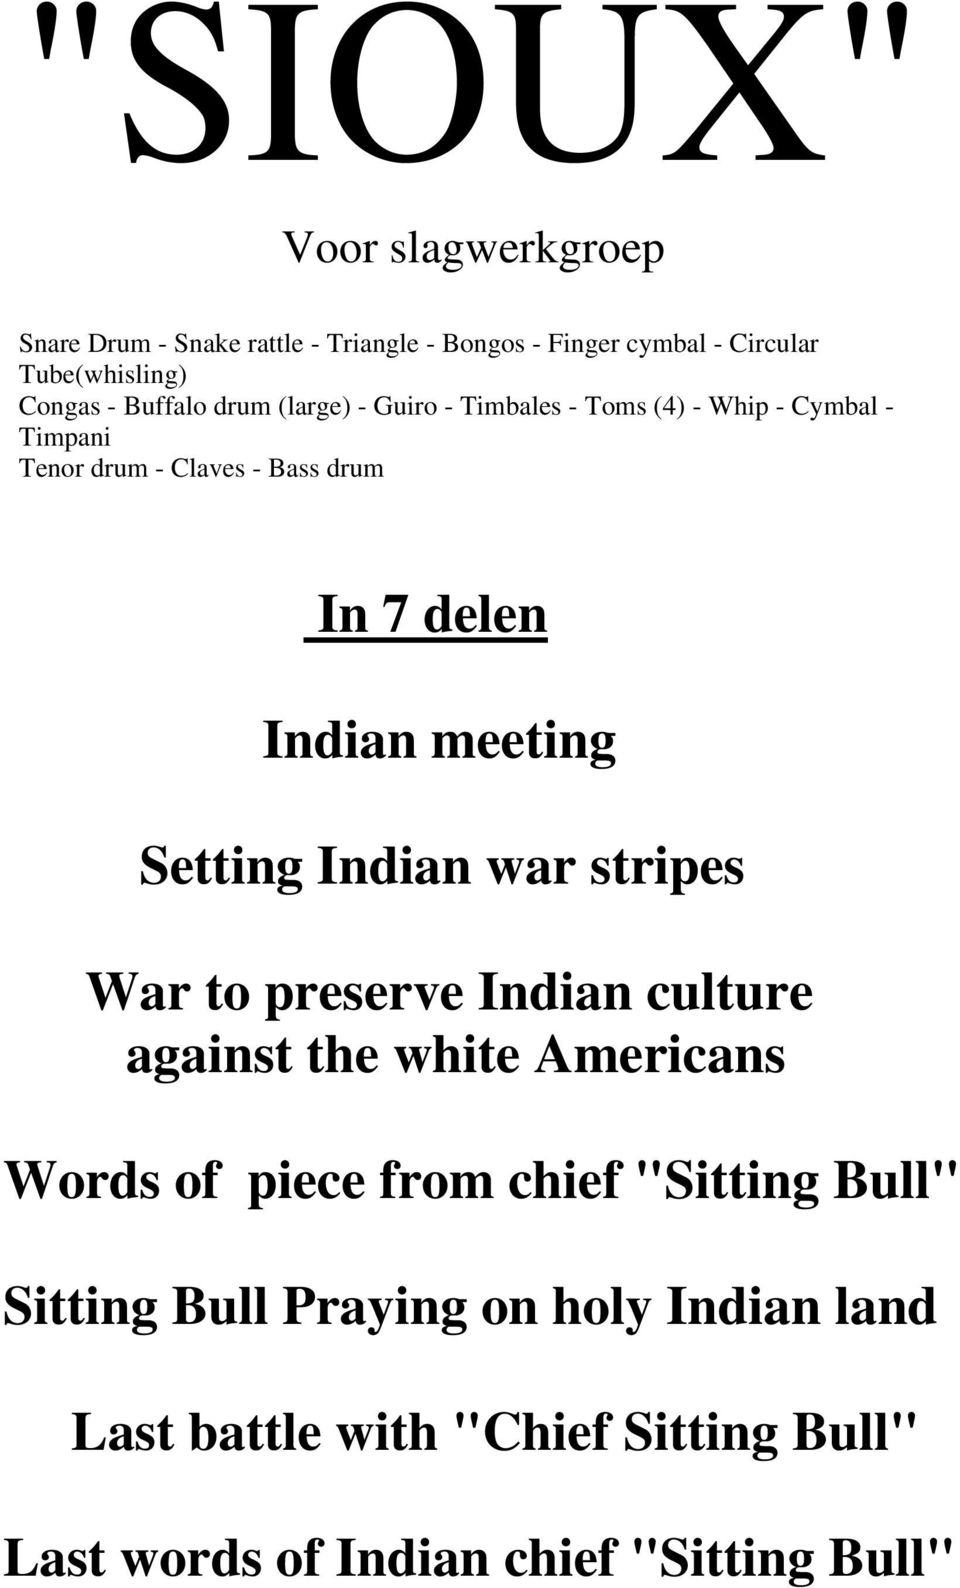 Indian meeting Setting Indian ar stries War to reserve Indian culture against the hite Americans Words o iece rom chie